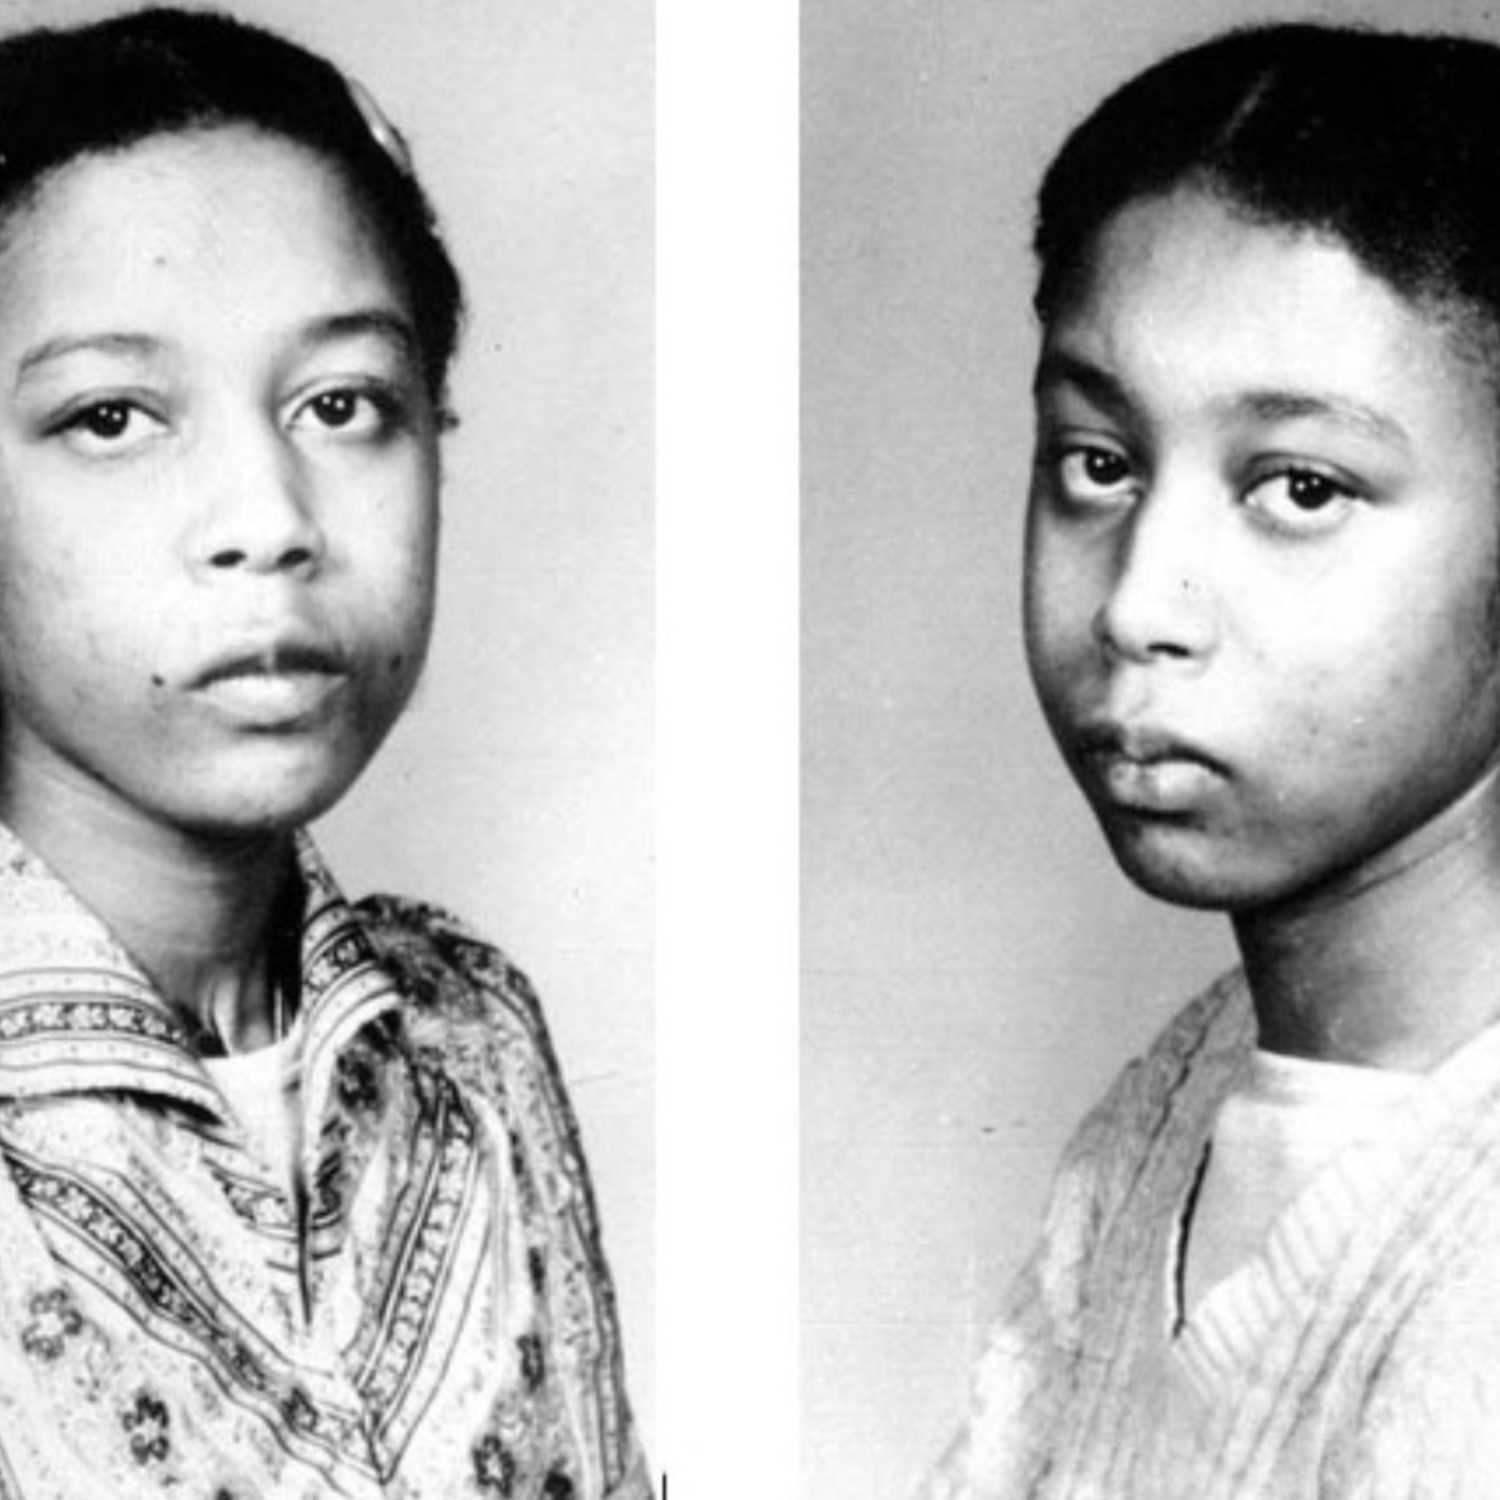 The Chilling Story of the Silent Twins